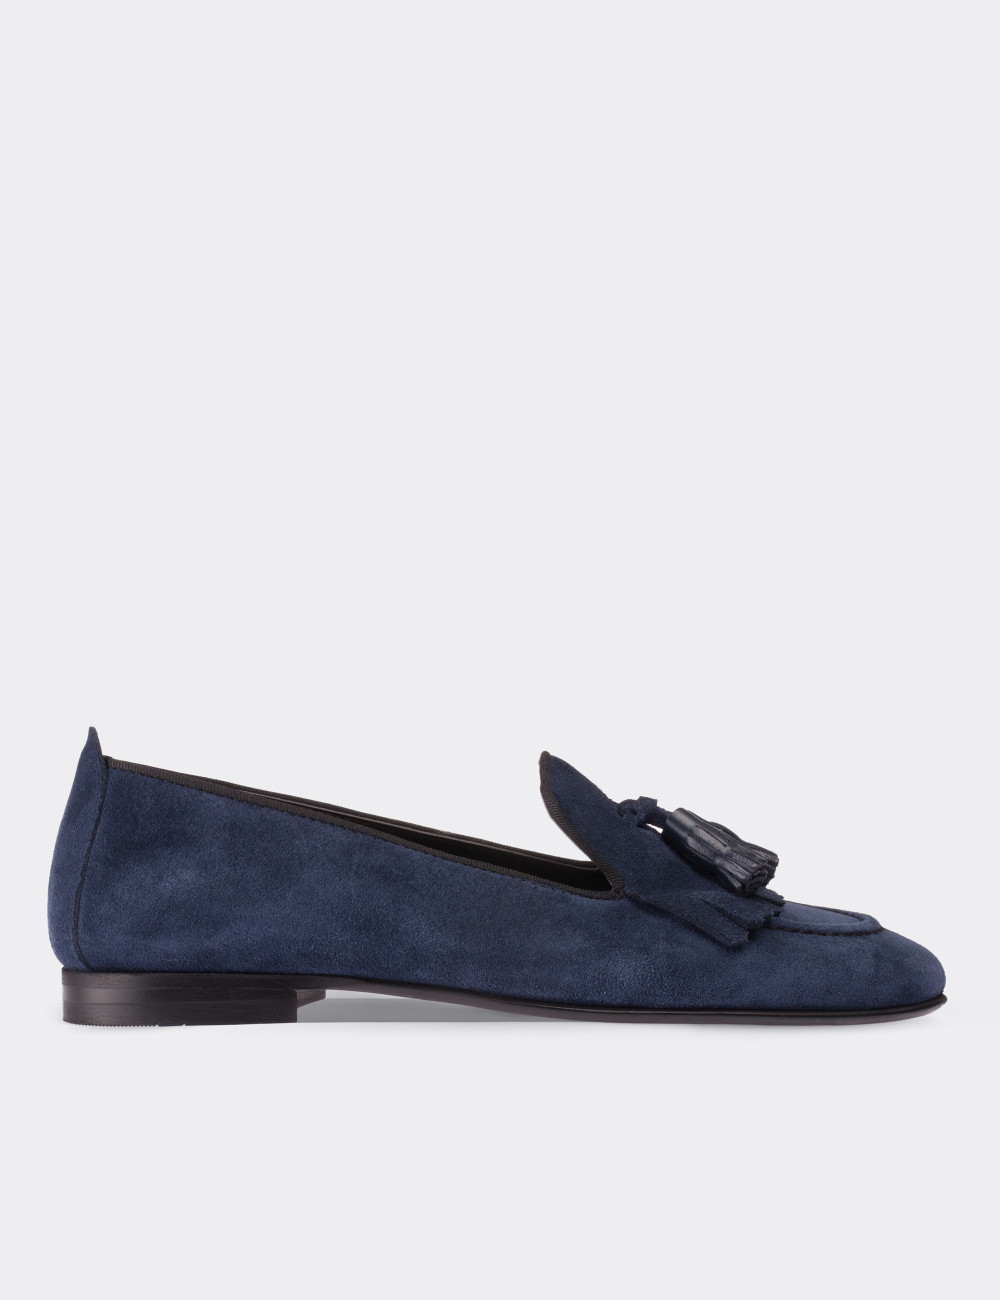 Navy Suede Leather Loafers - 01618ZLCVM03